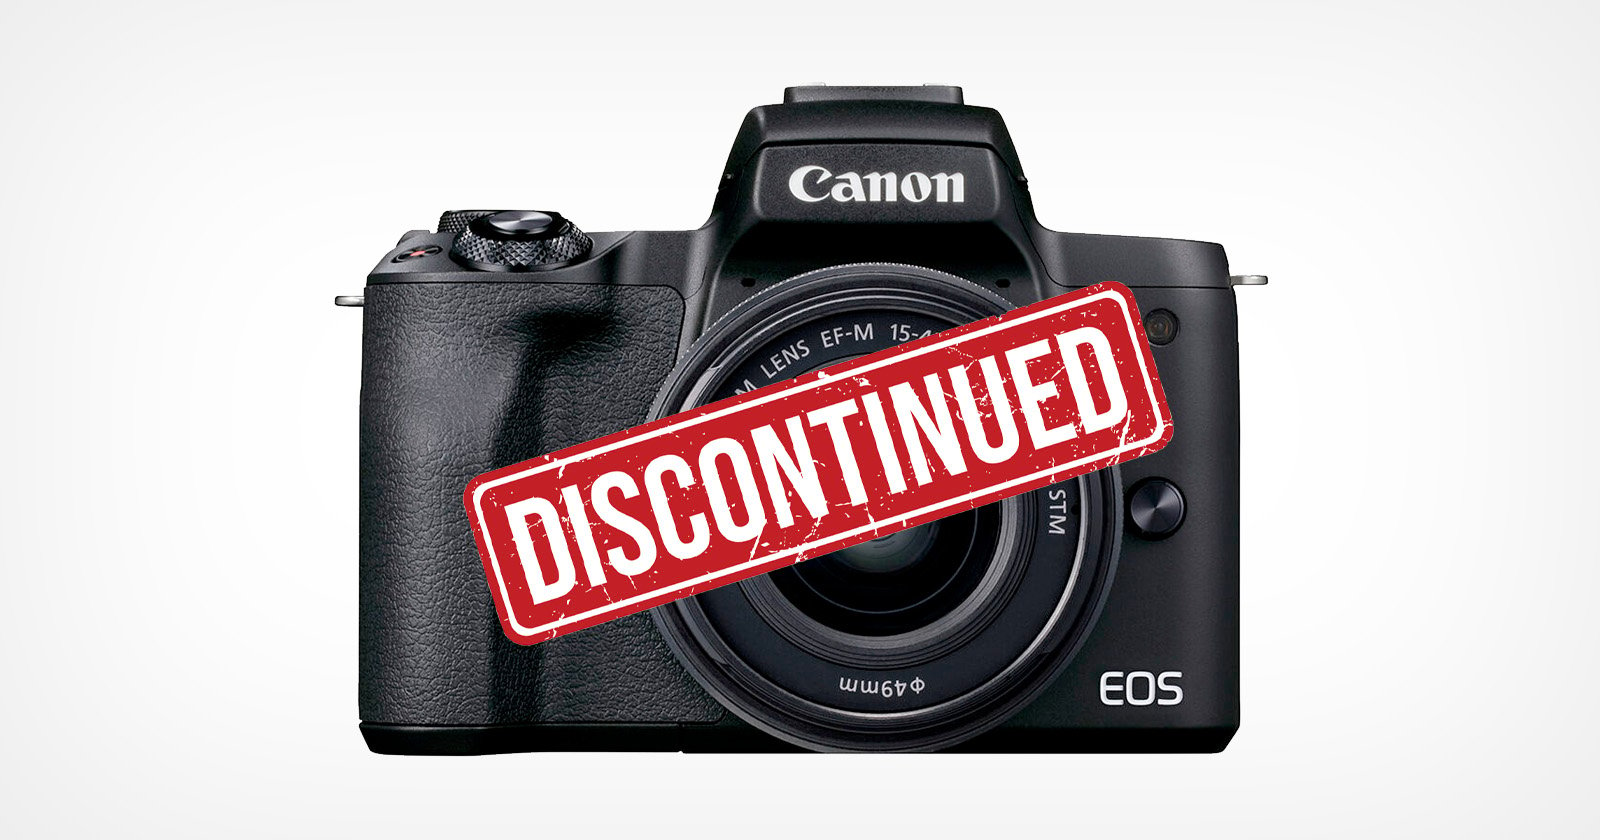  canon finally discontinues eos camera system 